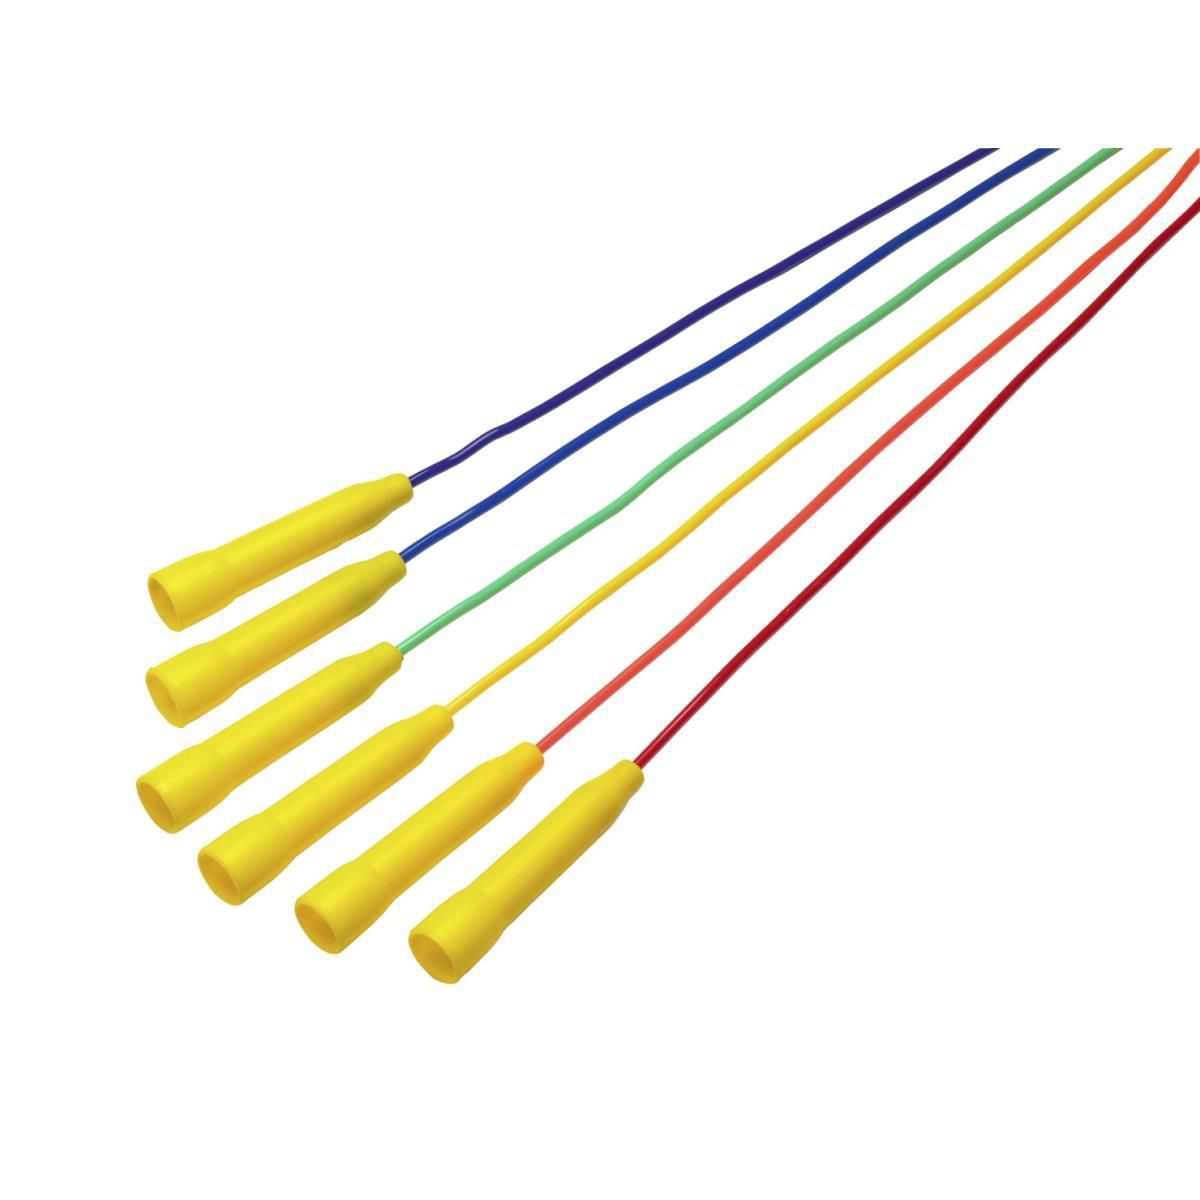 Image for HWR Sportime Solid Jump Ropes, 8 ft., Assorted Colors, Set of 6 at Kohl's.